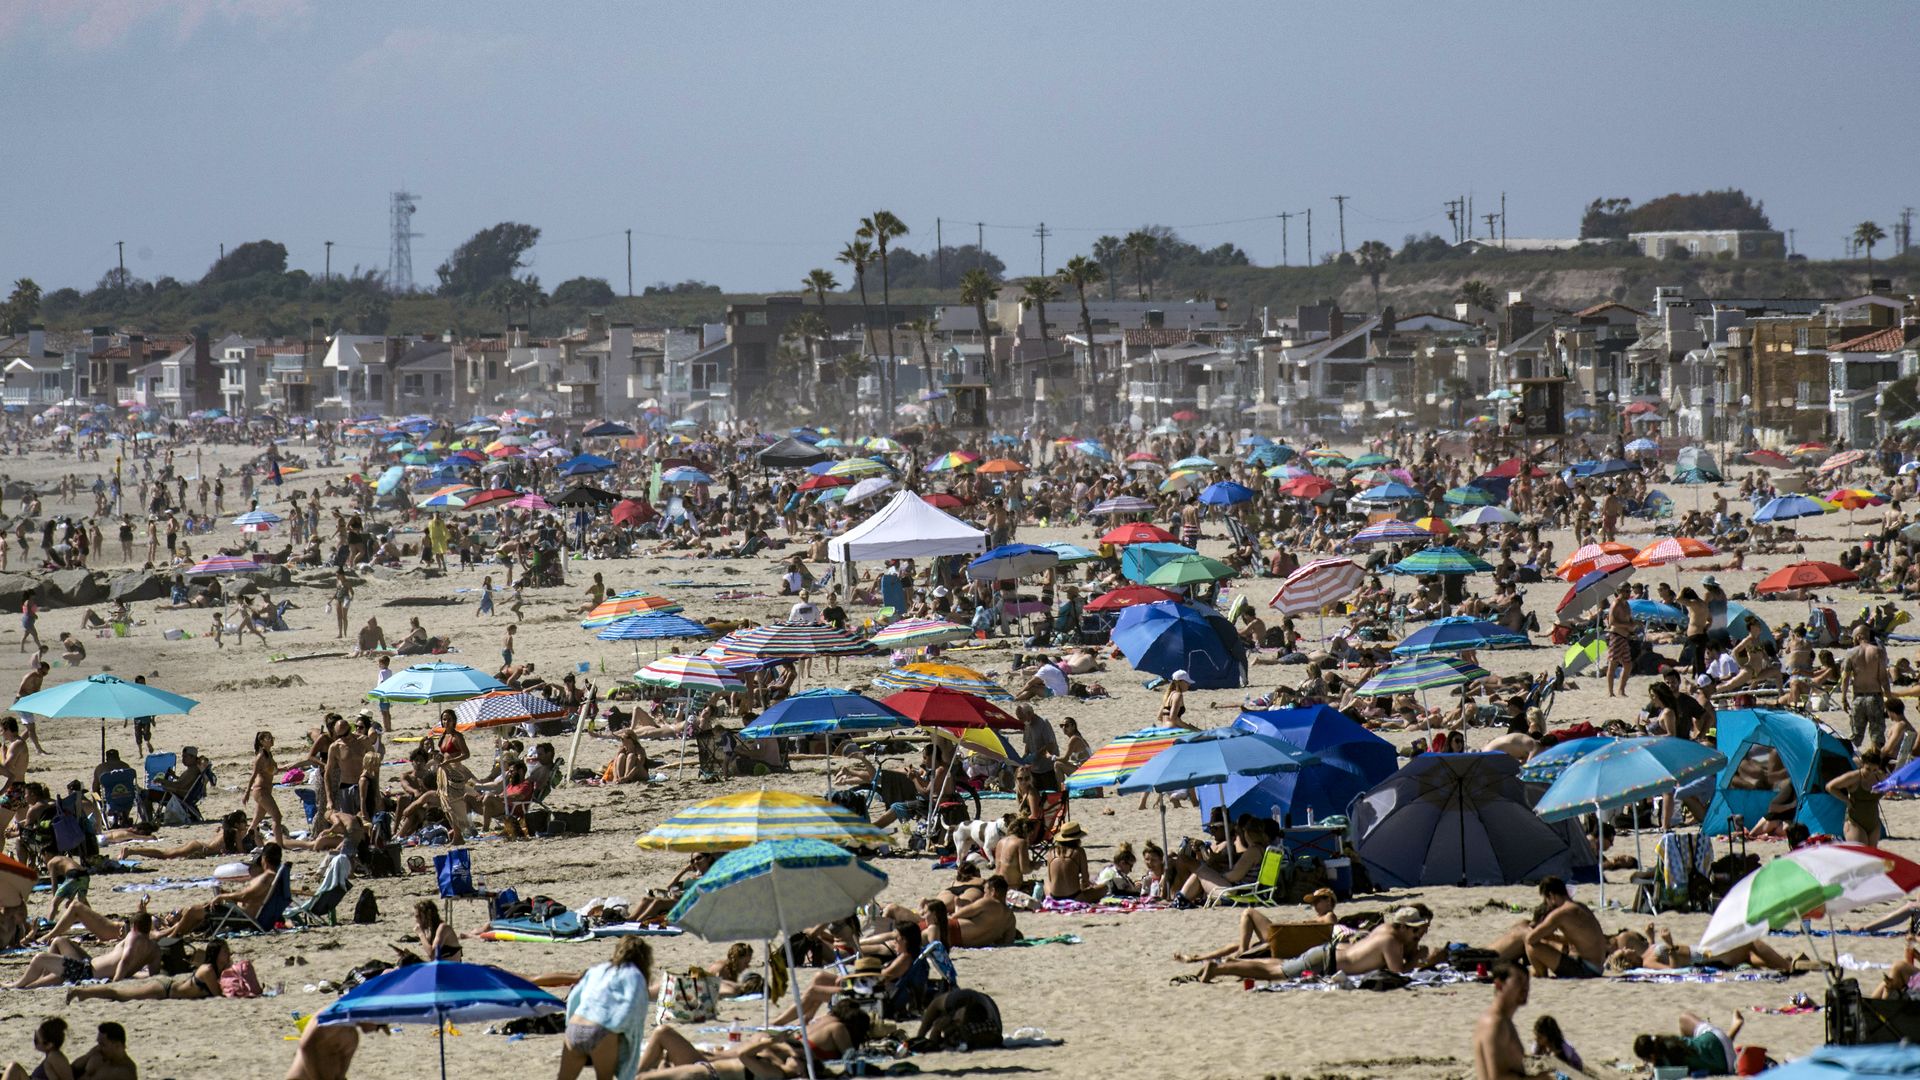 Large crowds gather near the Newport Beach Pier in Newport Beach on Saturday, April 25